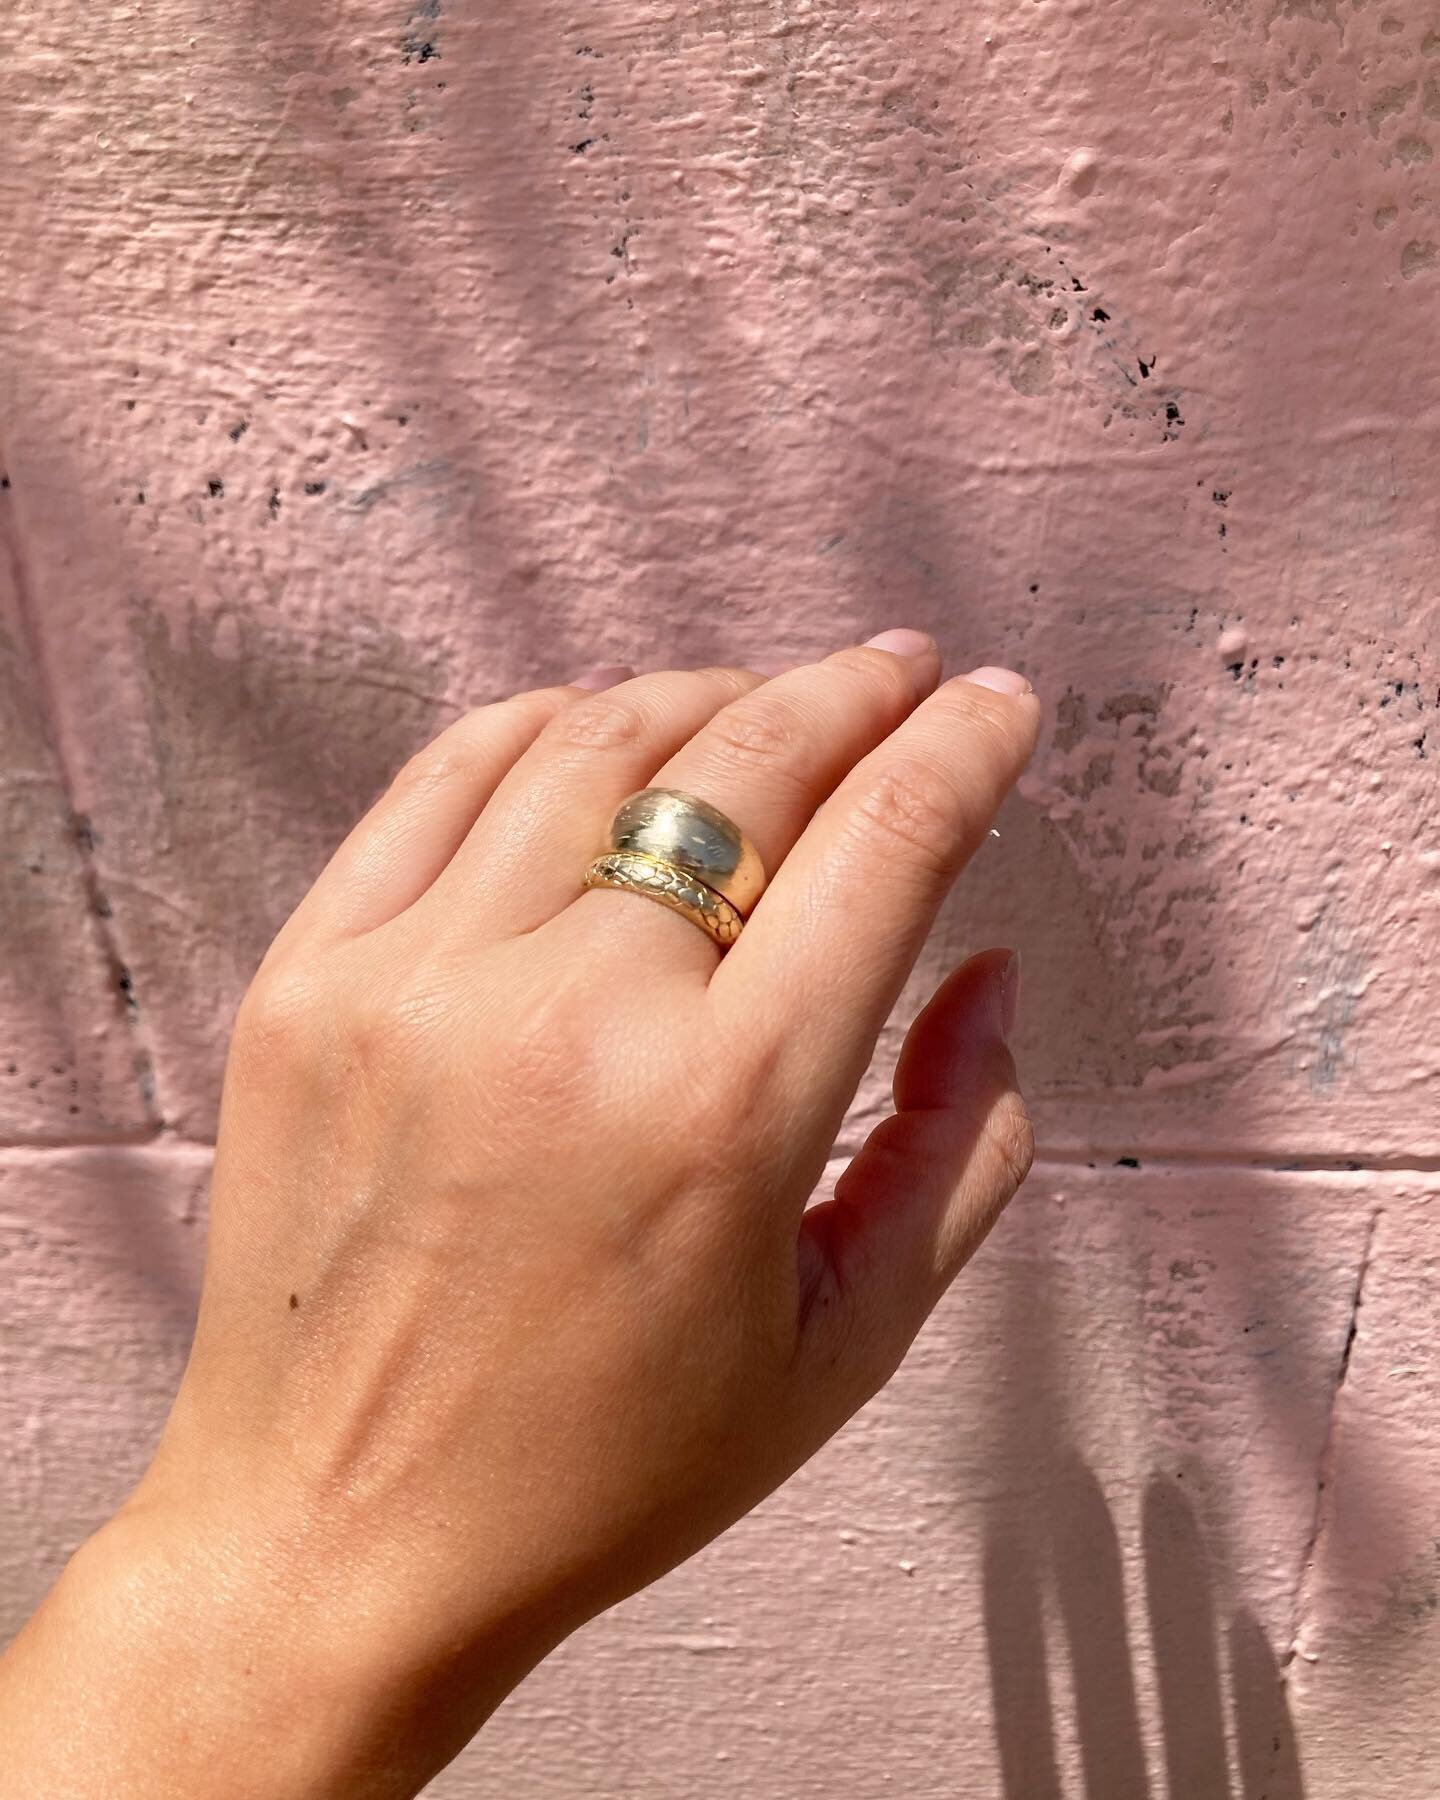 Tapered Stevie and medium Ana rings look SO GOOD together✌🏼

Mixing and matching texture, patterns and proportions is the name of a very fun golden game✨

#archerade #handmadejewellery #customjewelry #torontodesigner #torontojeweller #torontojewelle